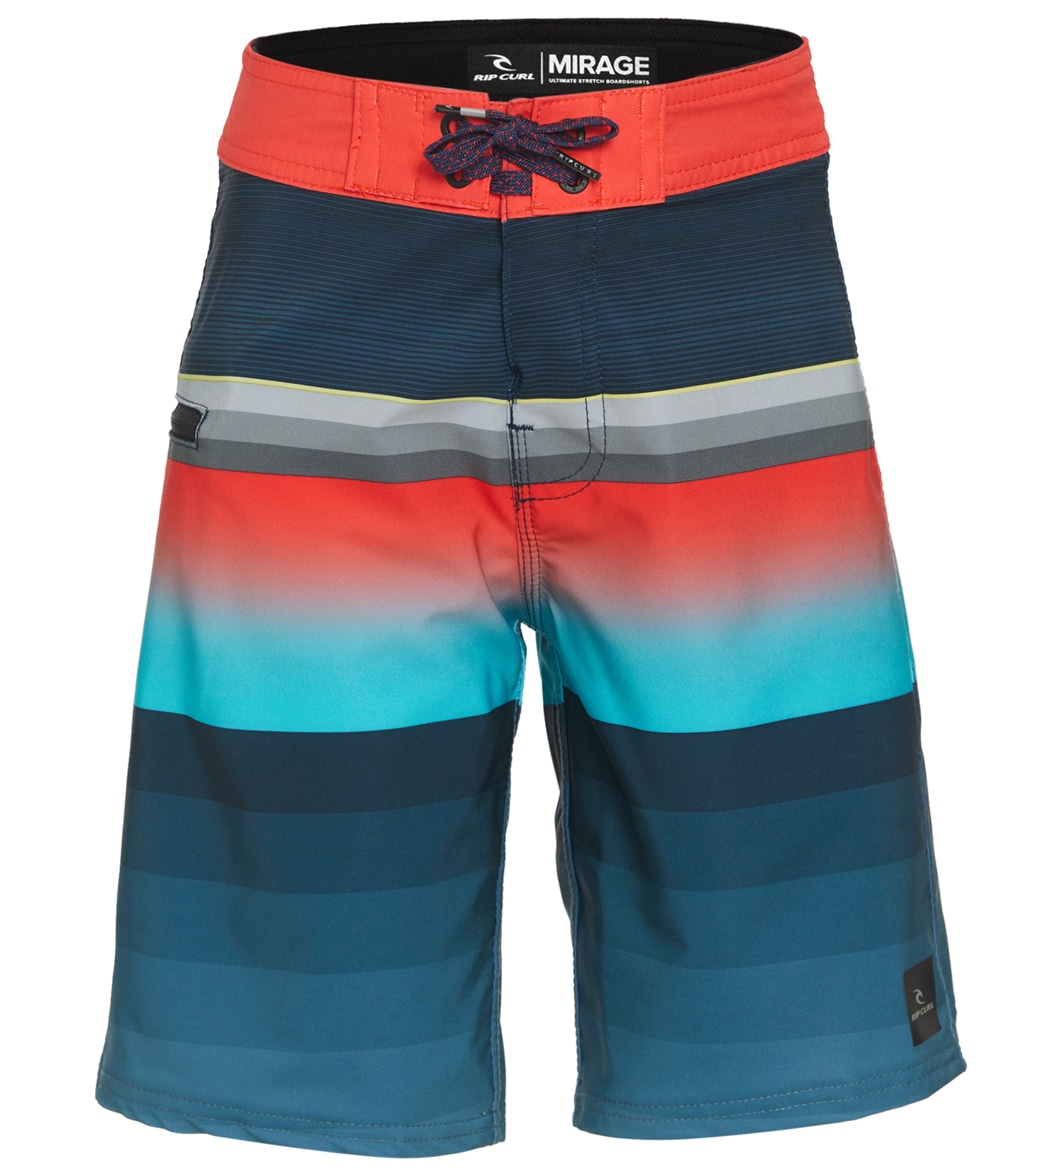 Rip Curl Boys' Mirage Daybreakers Board Shorts Big Kid - Charcoal Navy 10 - Swimoutlet.com